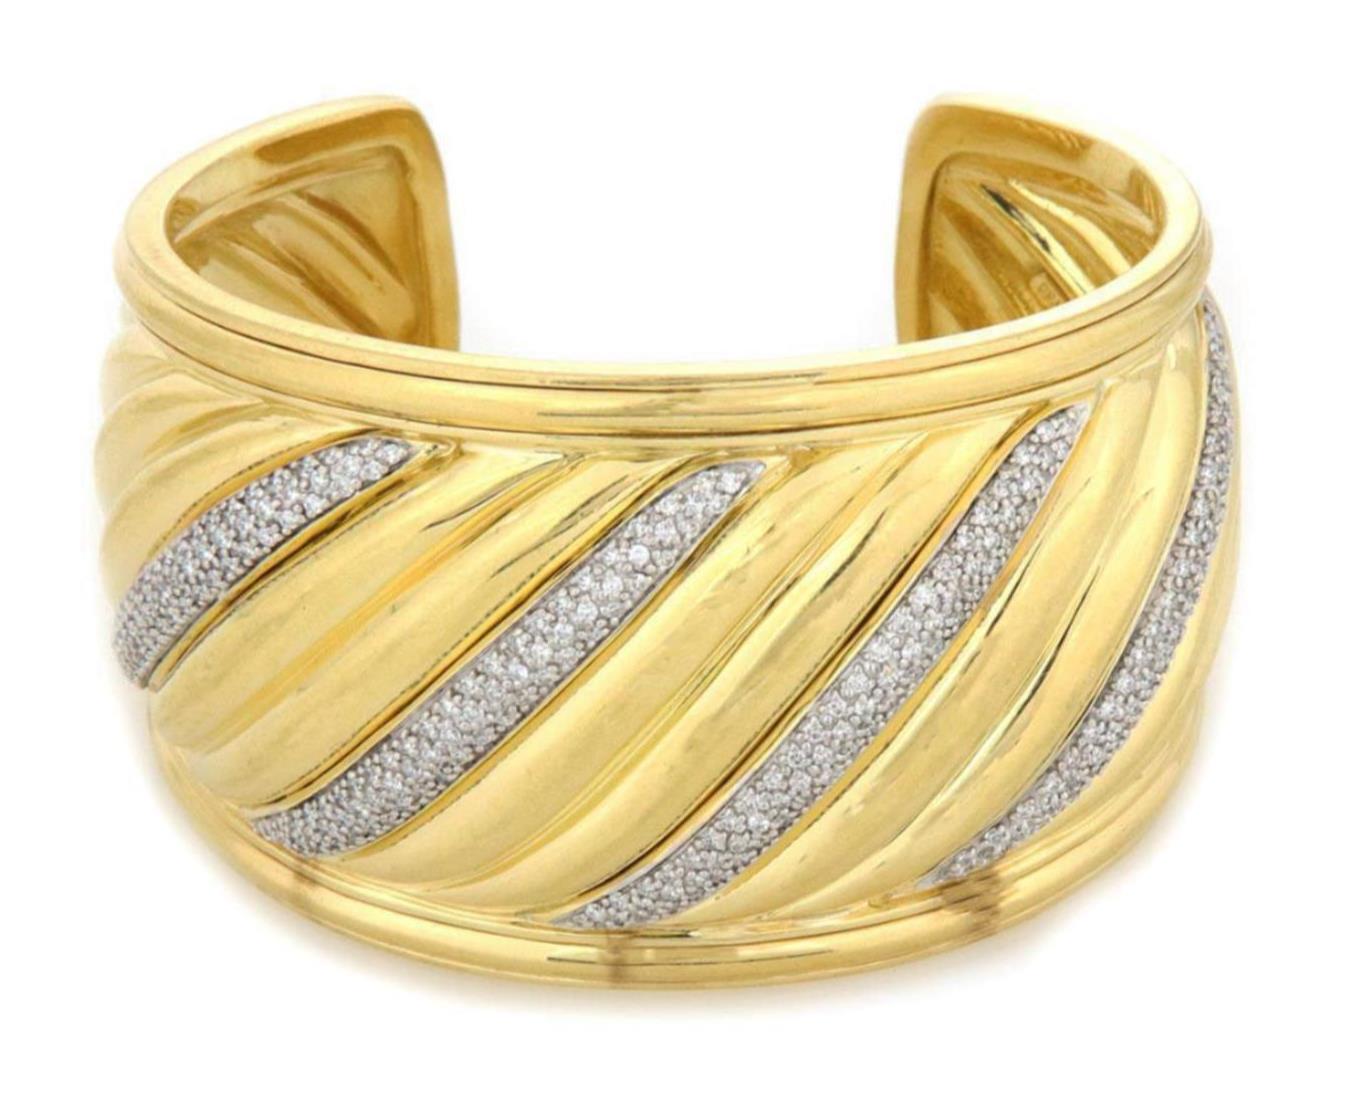 This is an authentic eye-catching cuff  bracelet by David Yurman from the Sculpted Cable collection, it is crafted from 18k yellow gold with a polished finish featuring a 41mm wide band in the cable style, the front center of the bracelet has 4 long